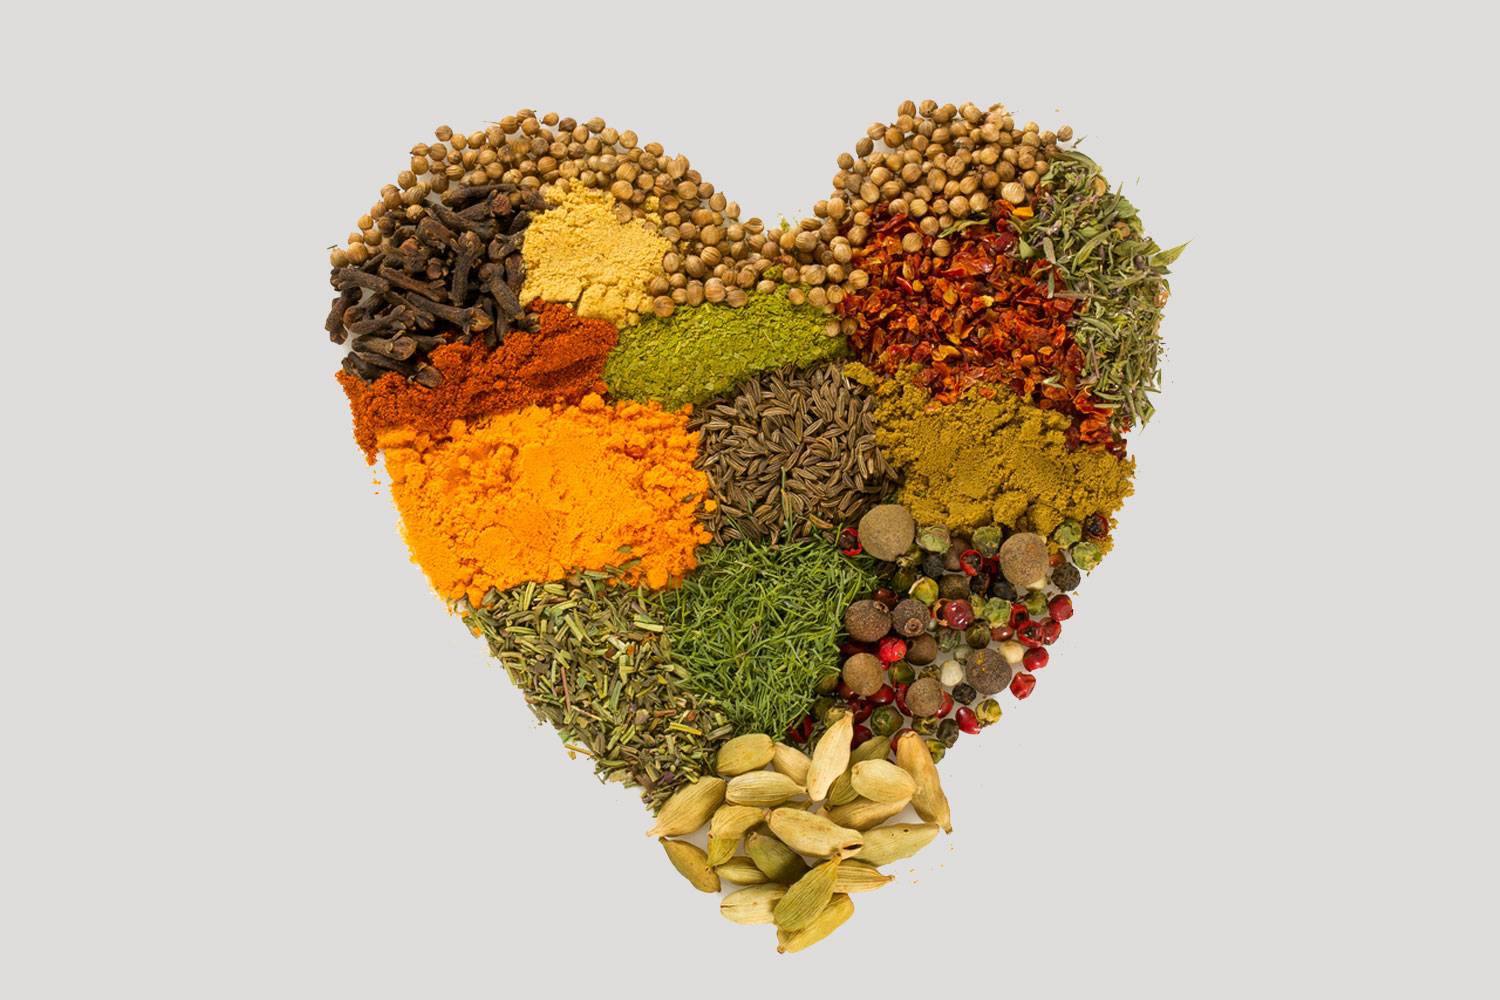 Spice Up Your Health: Exploring the Nutritional Riches of Everyday Spices